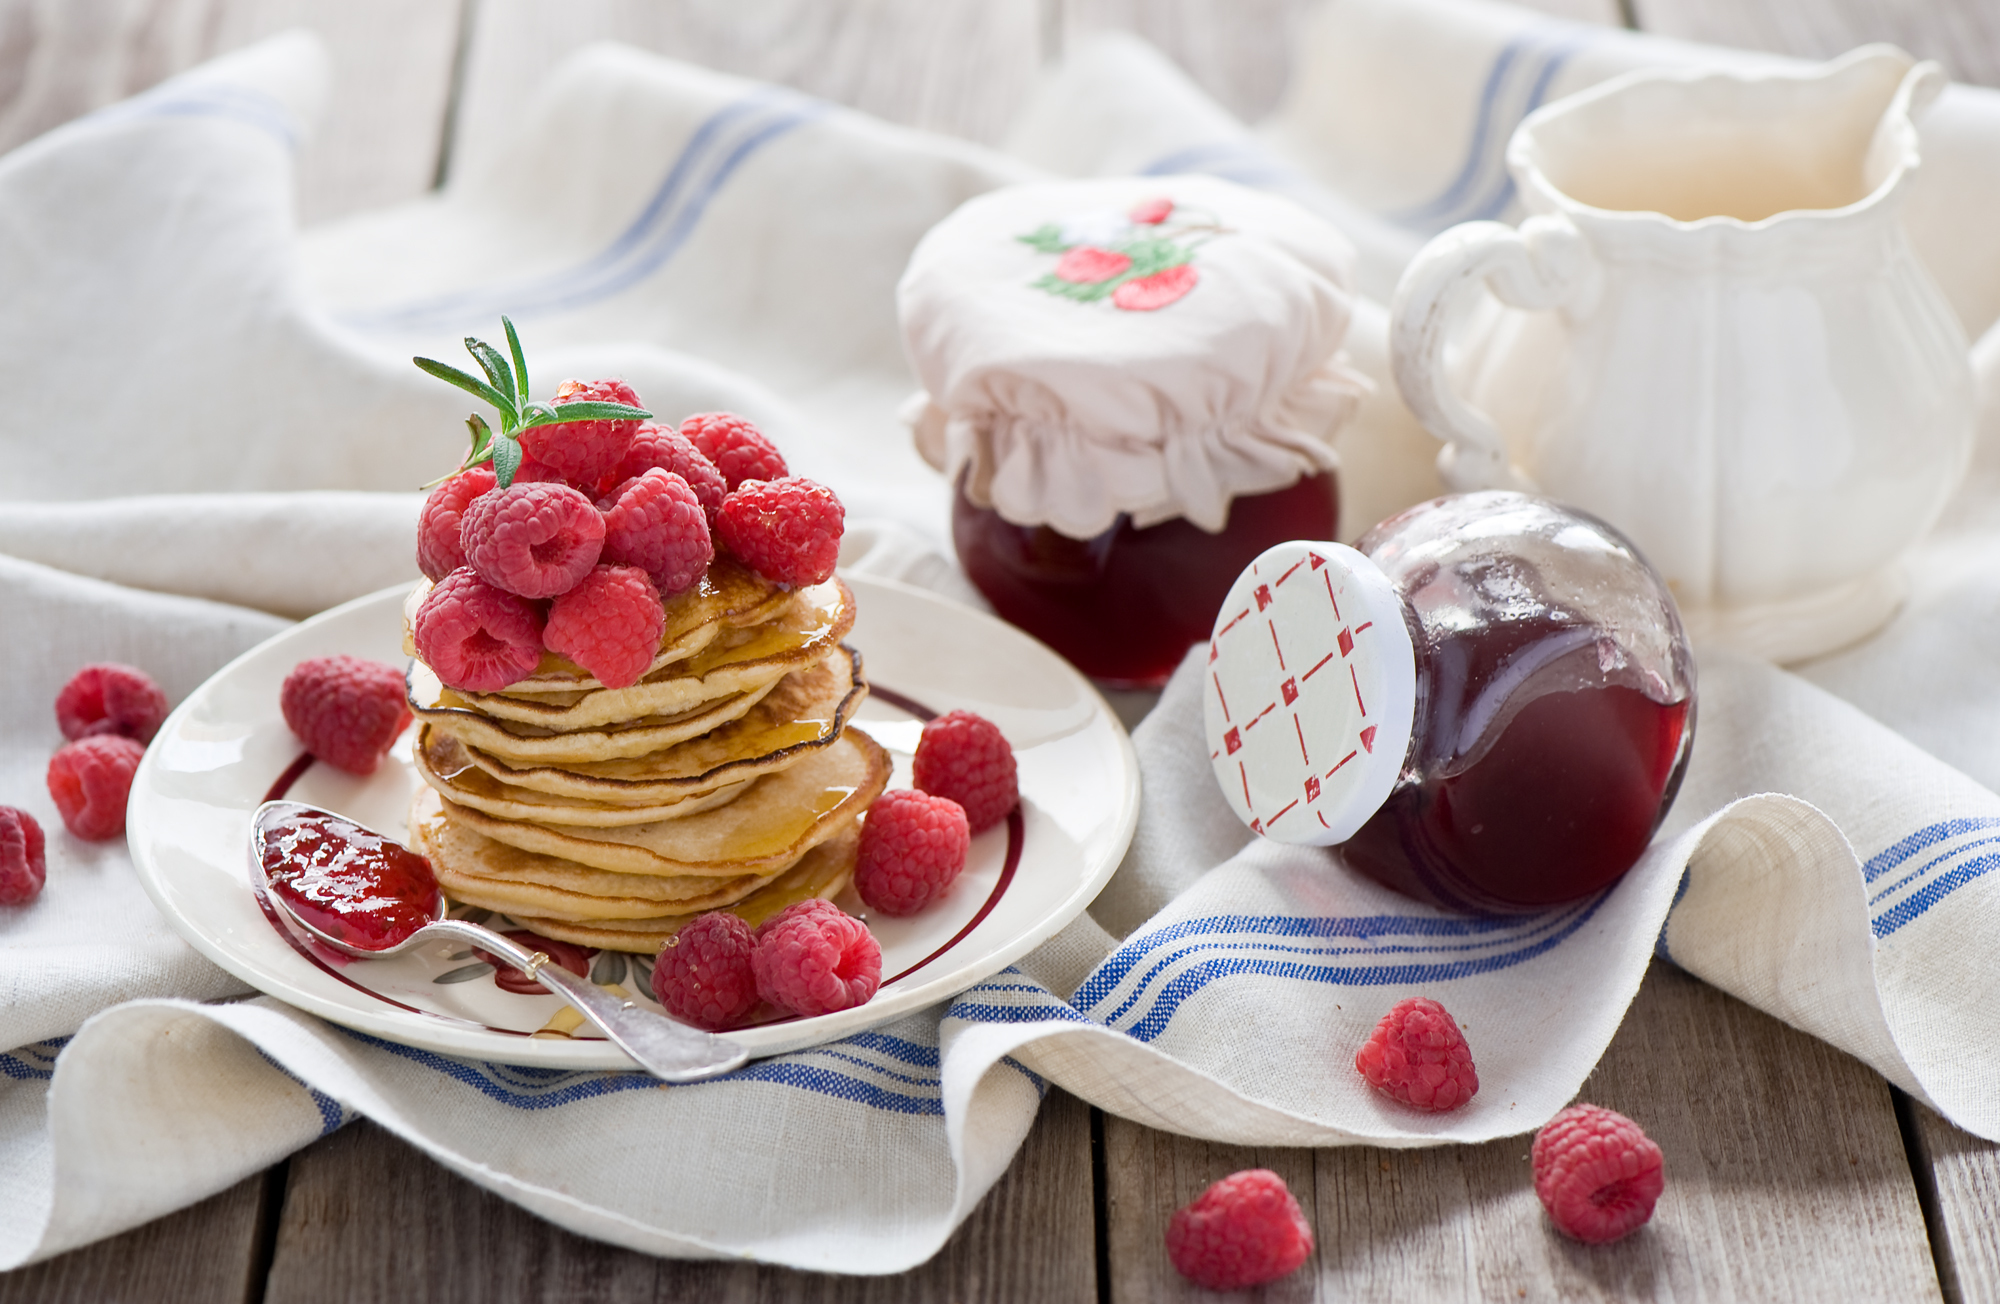 51009 download wallpaper food, tablewares, raspberry, pancakes, fritter, jam screensavers and pictures for free